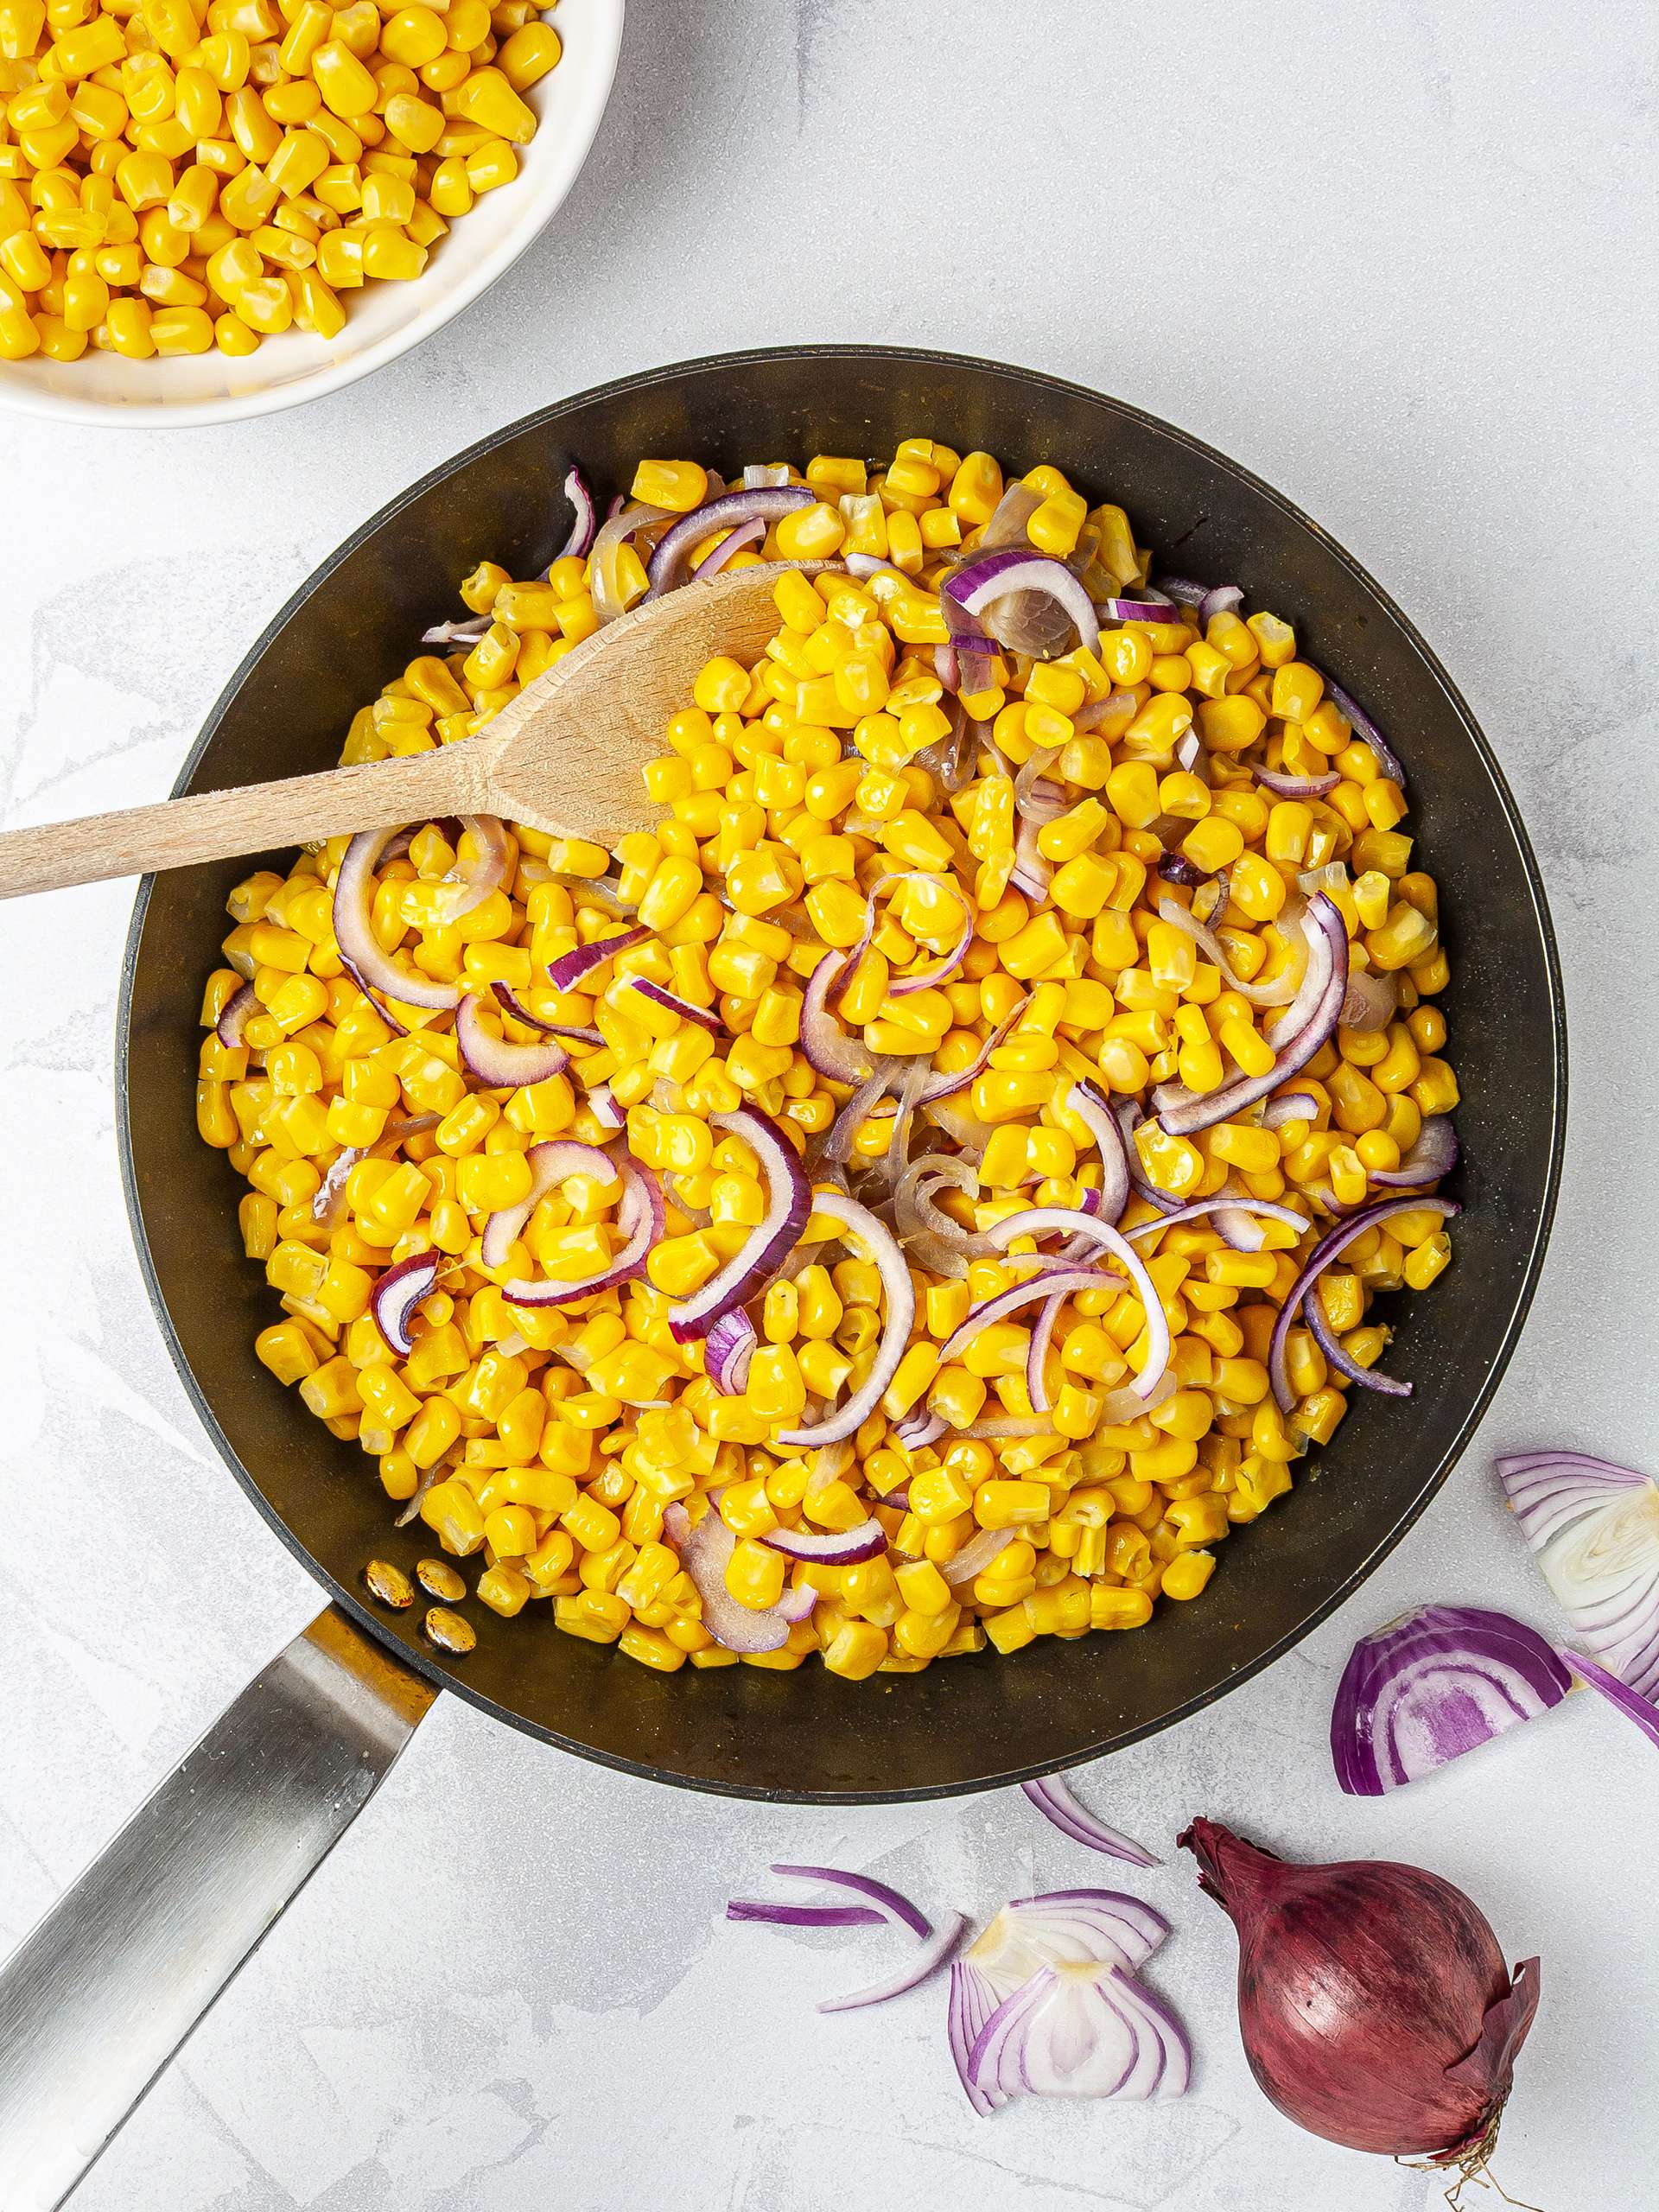 Sweet corn cooking in a pan with red onions.